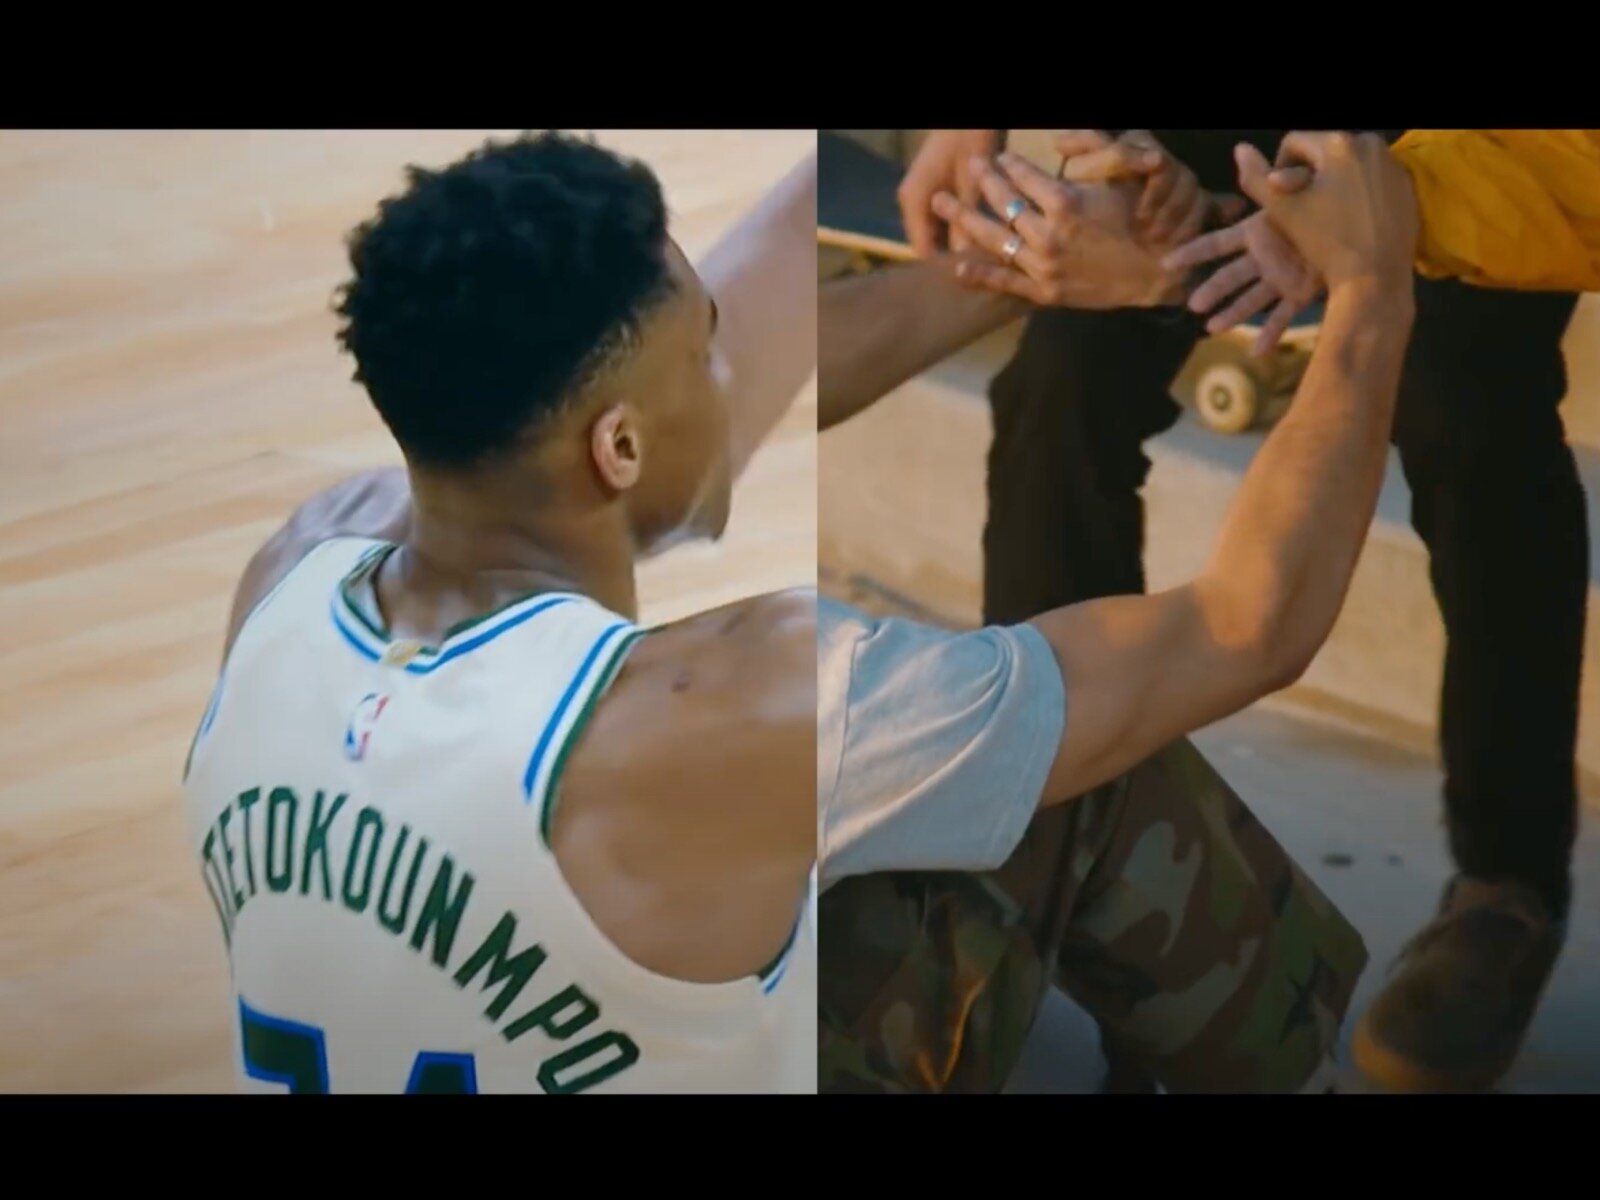 giannis nike commercial